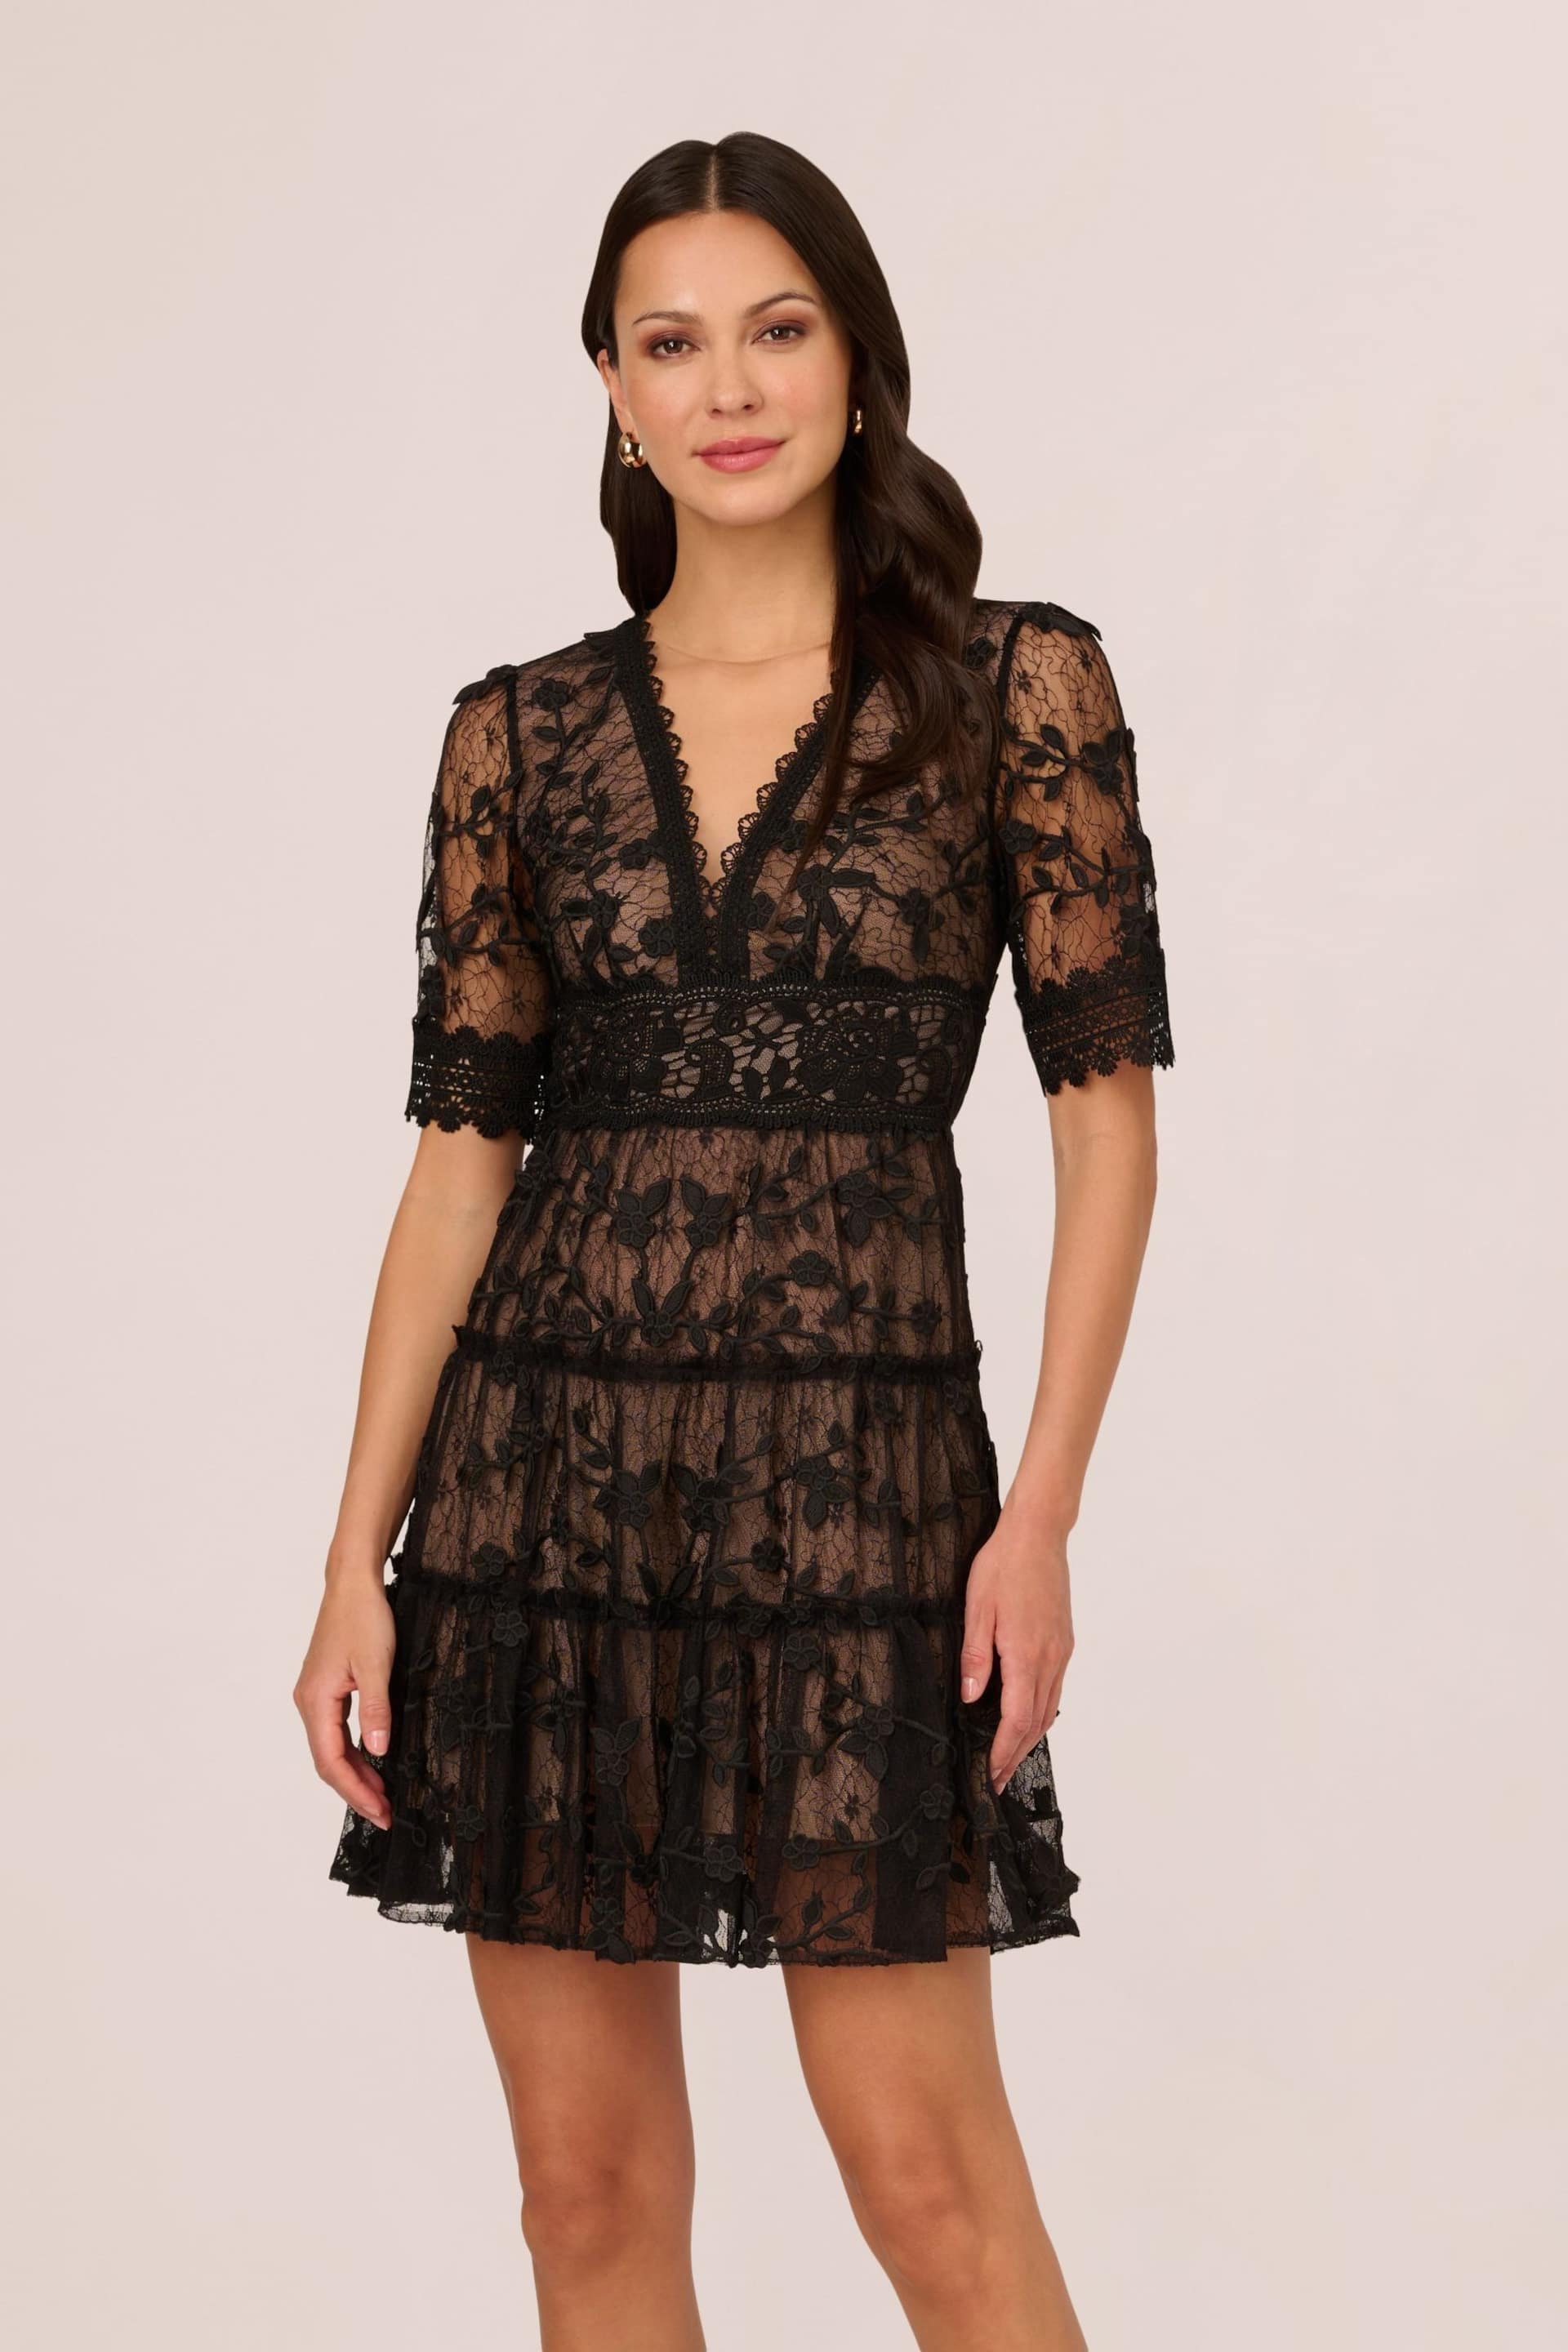 Adrianna Papell Lace Embroidery Black Dress - Image 1 of 8